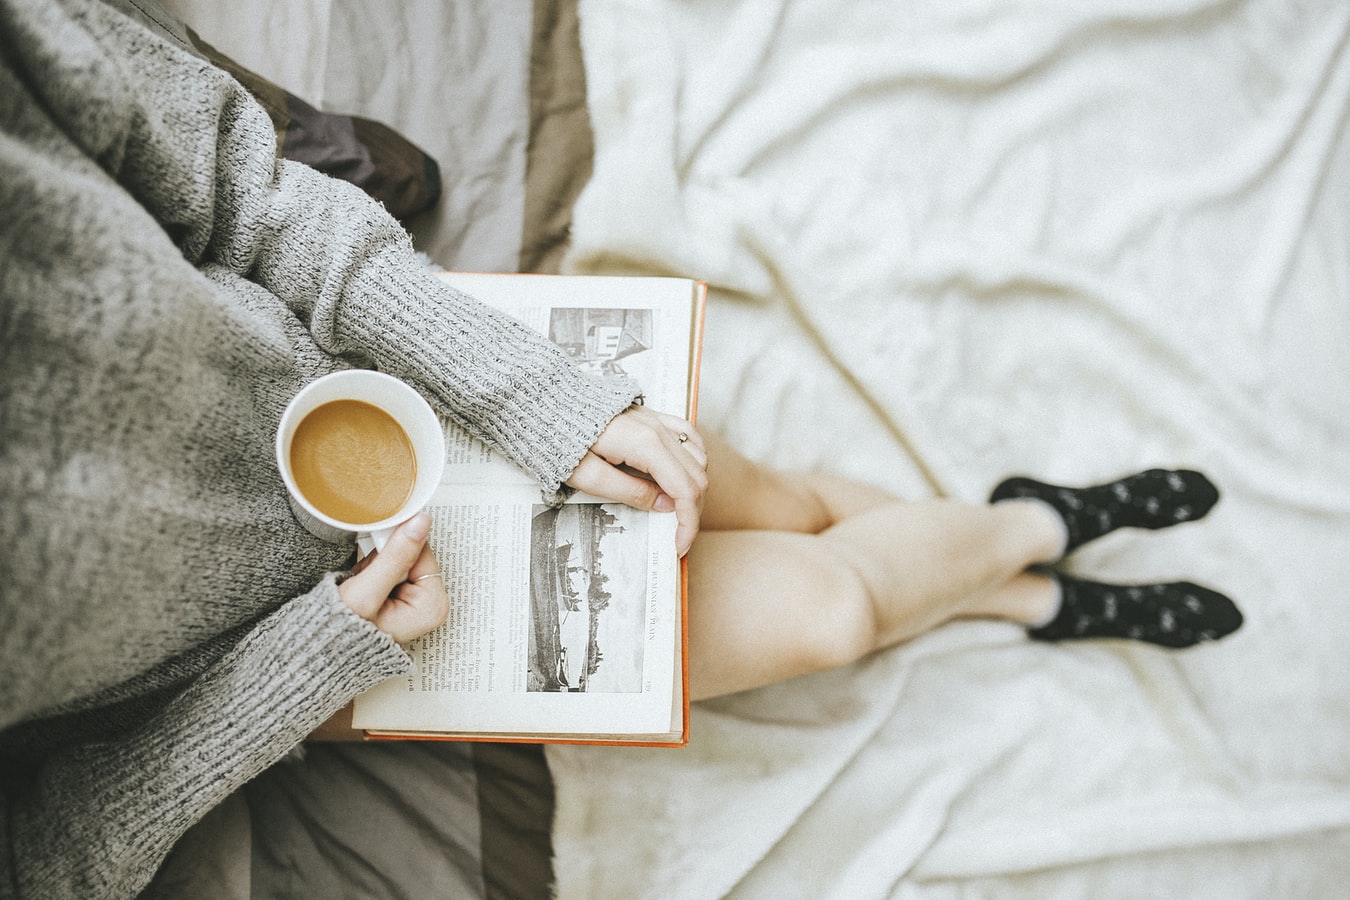 An individual relaxing while drinking coffee and reading a book.